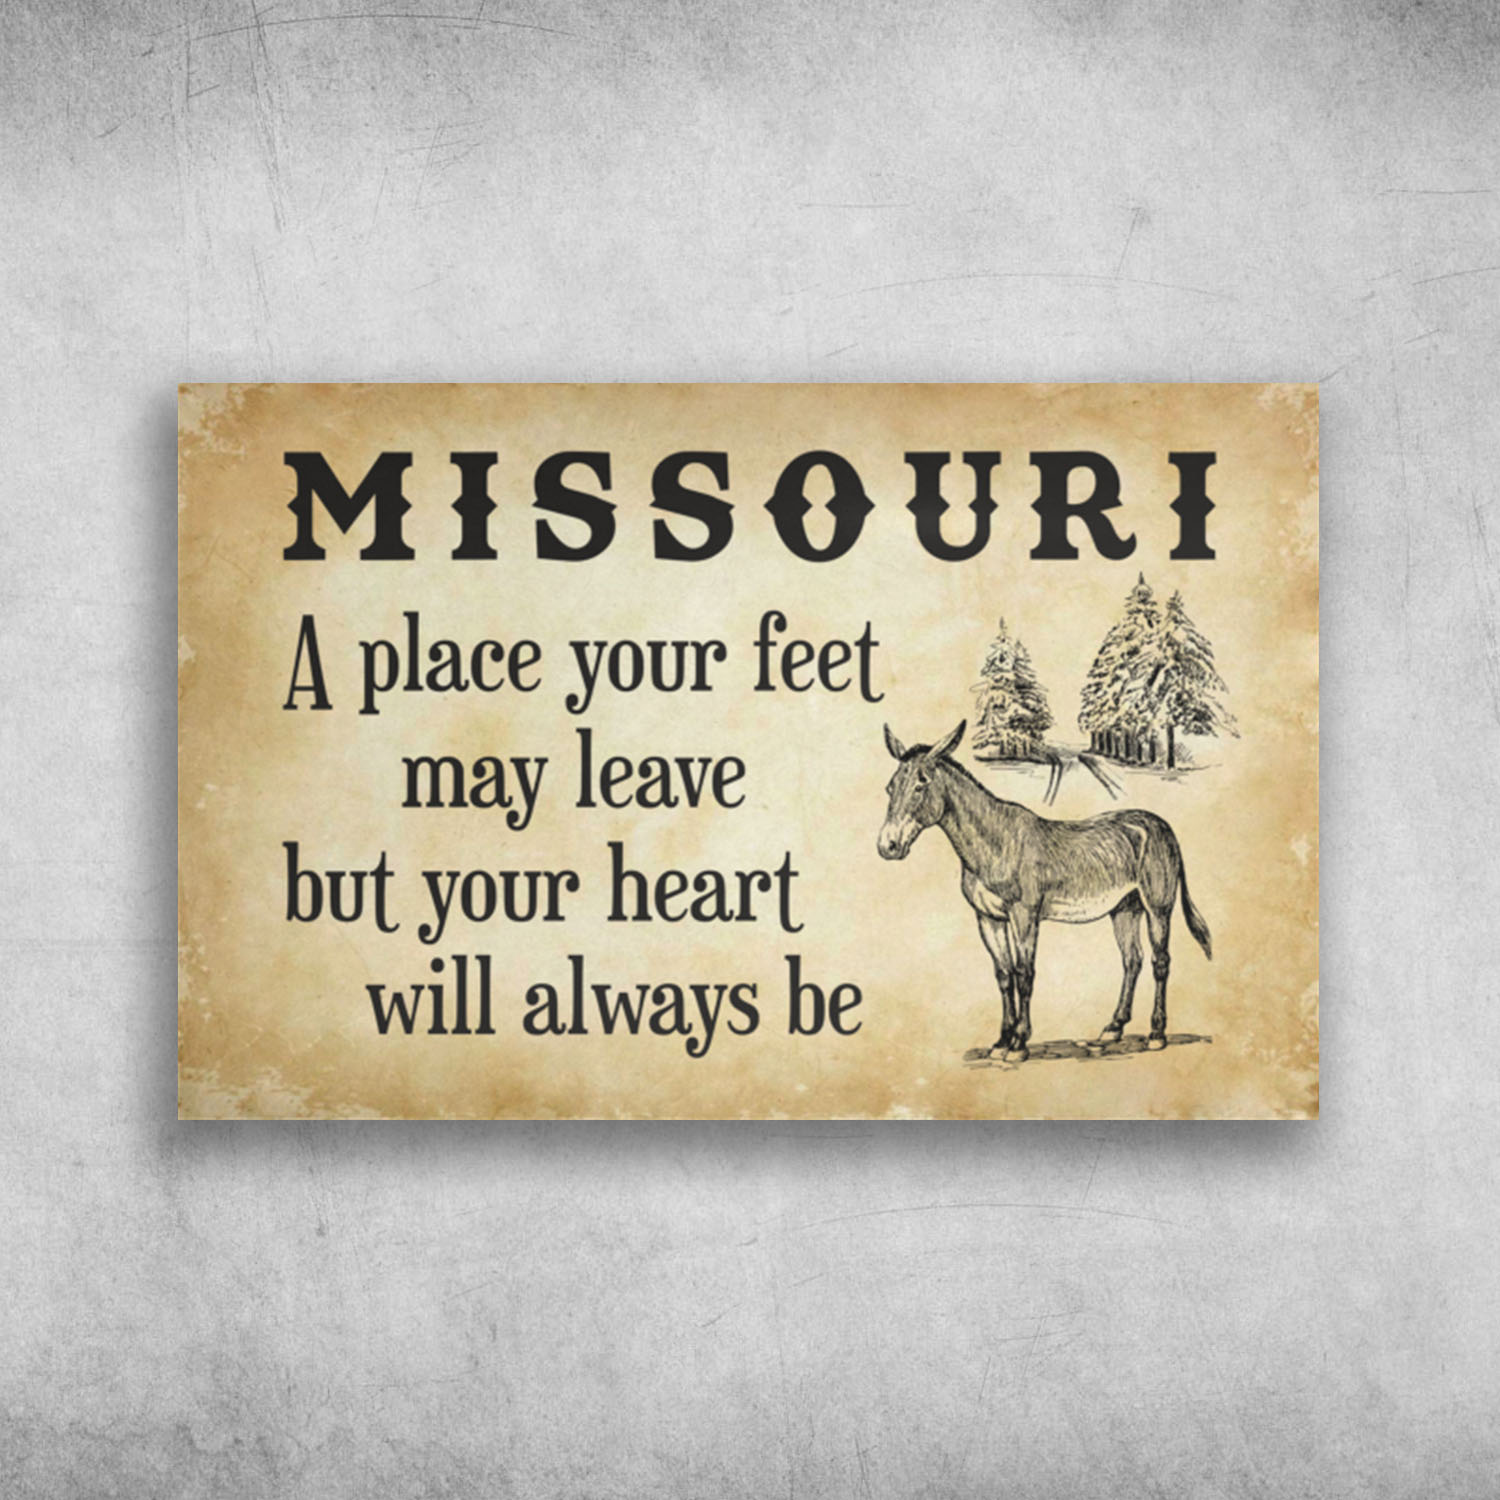 Missouri A Place Your Feet May Leave But Your Heart Will Always Be